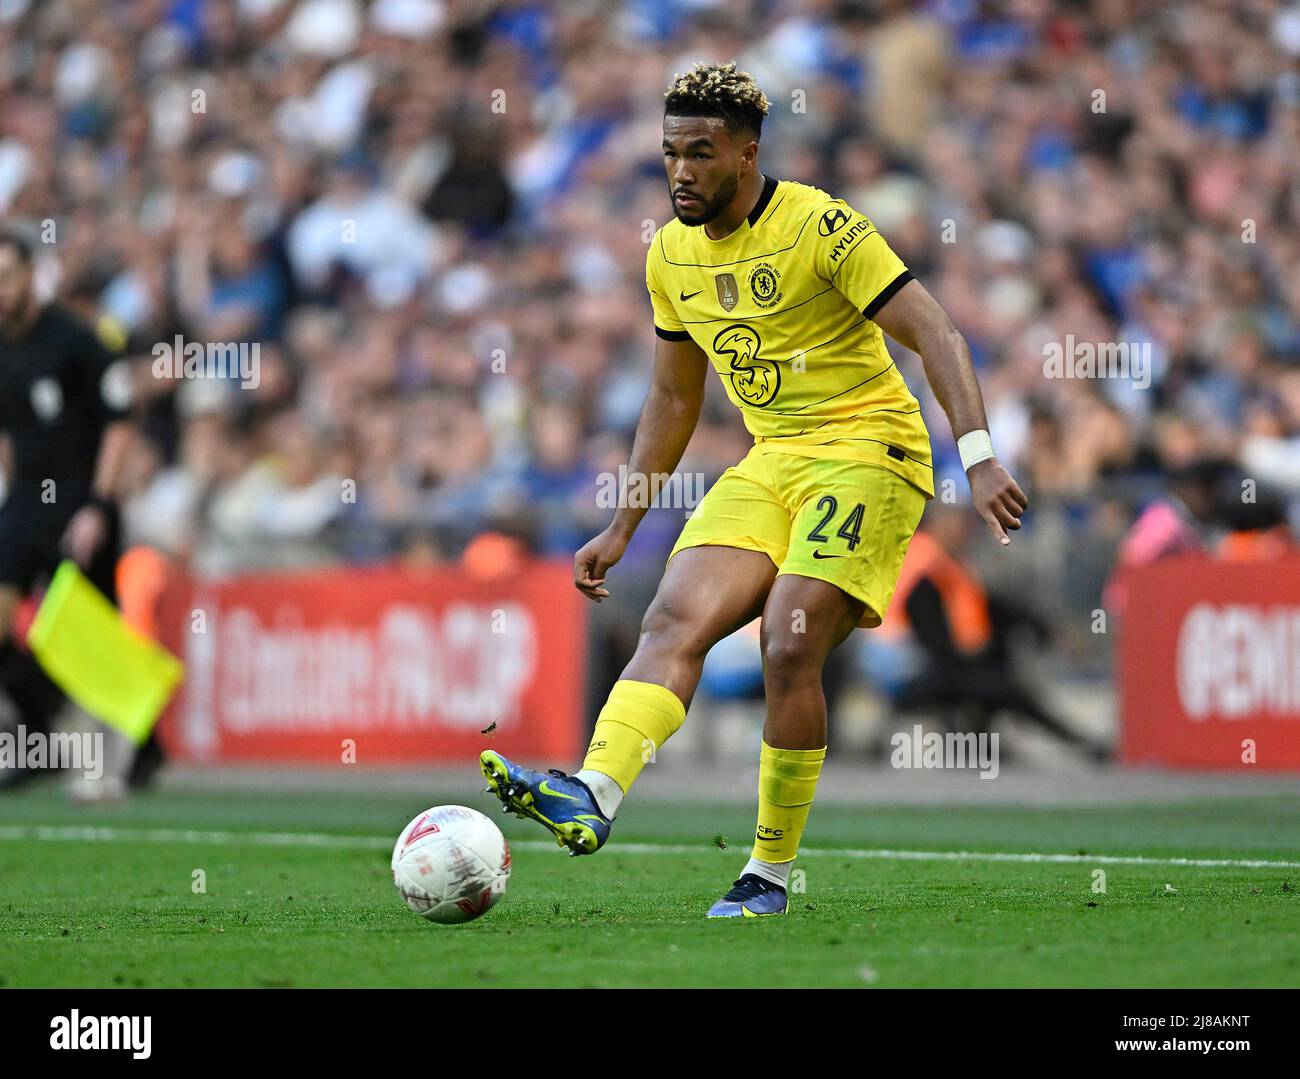 London, UK. 14th May, 2022. Reece James (Chelsea) during the FA Cup Final match between Chelsea and Liverpool at Wembley Stadium on May 14th 2022 in London, England. (Photo by Garry Bowden/phcimages.com) Credit: PHC Images/Alamy Live News Stock Photo